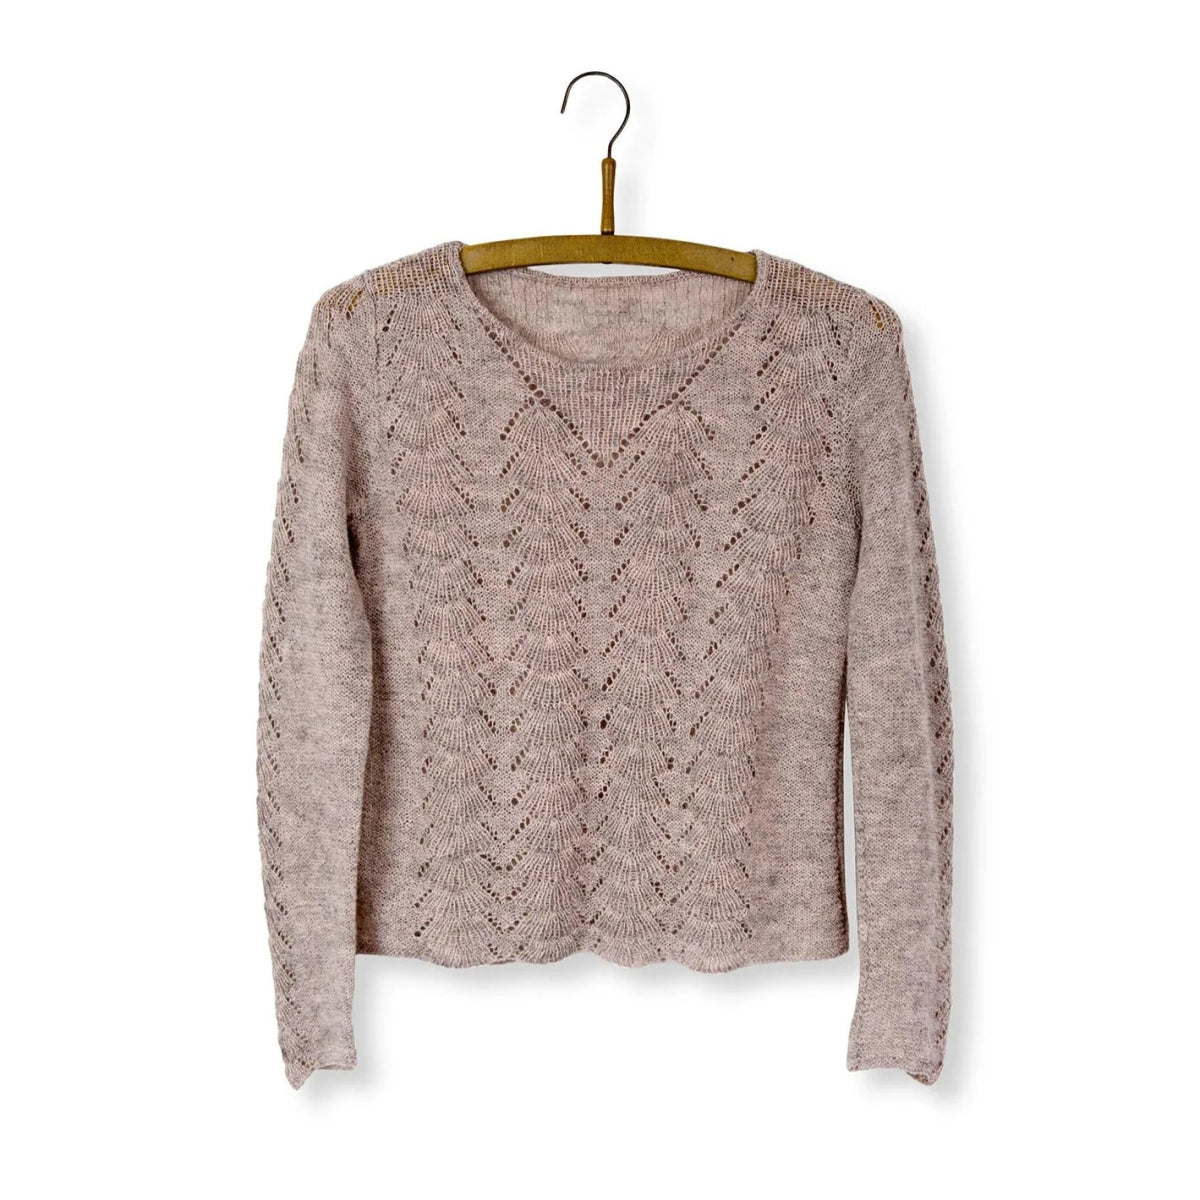 Isager Lace Sweater - Coming Soon - Isager - The Little Yarn Store